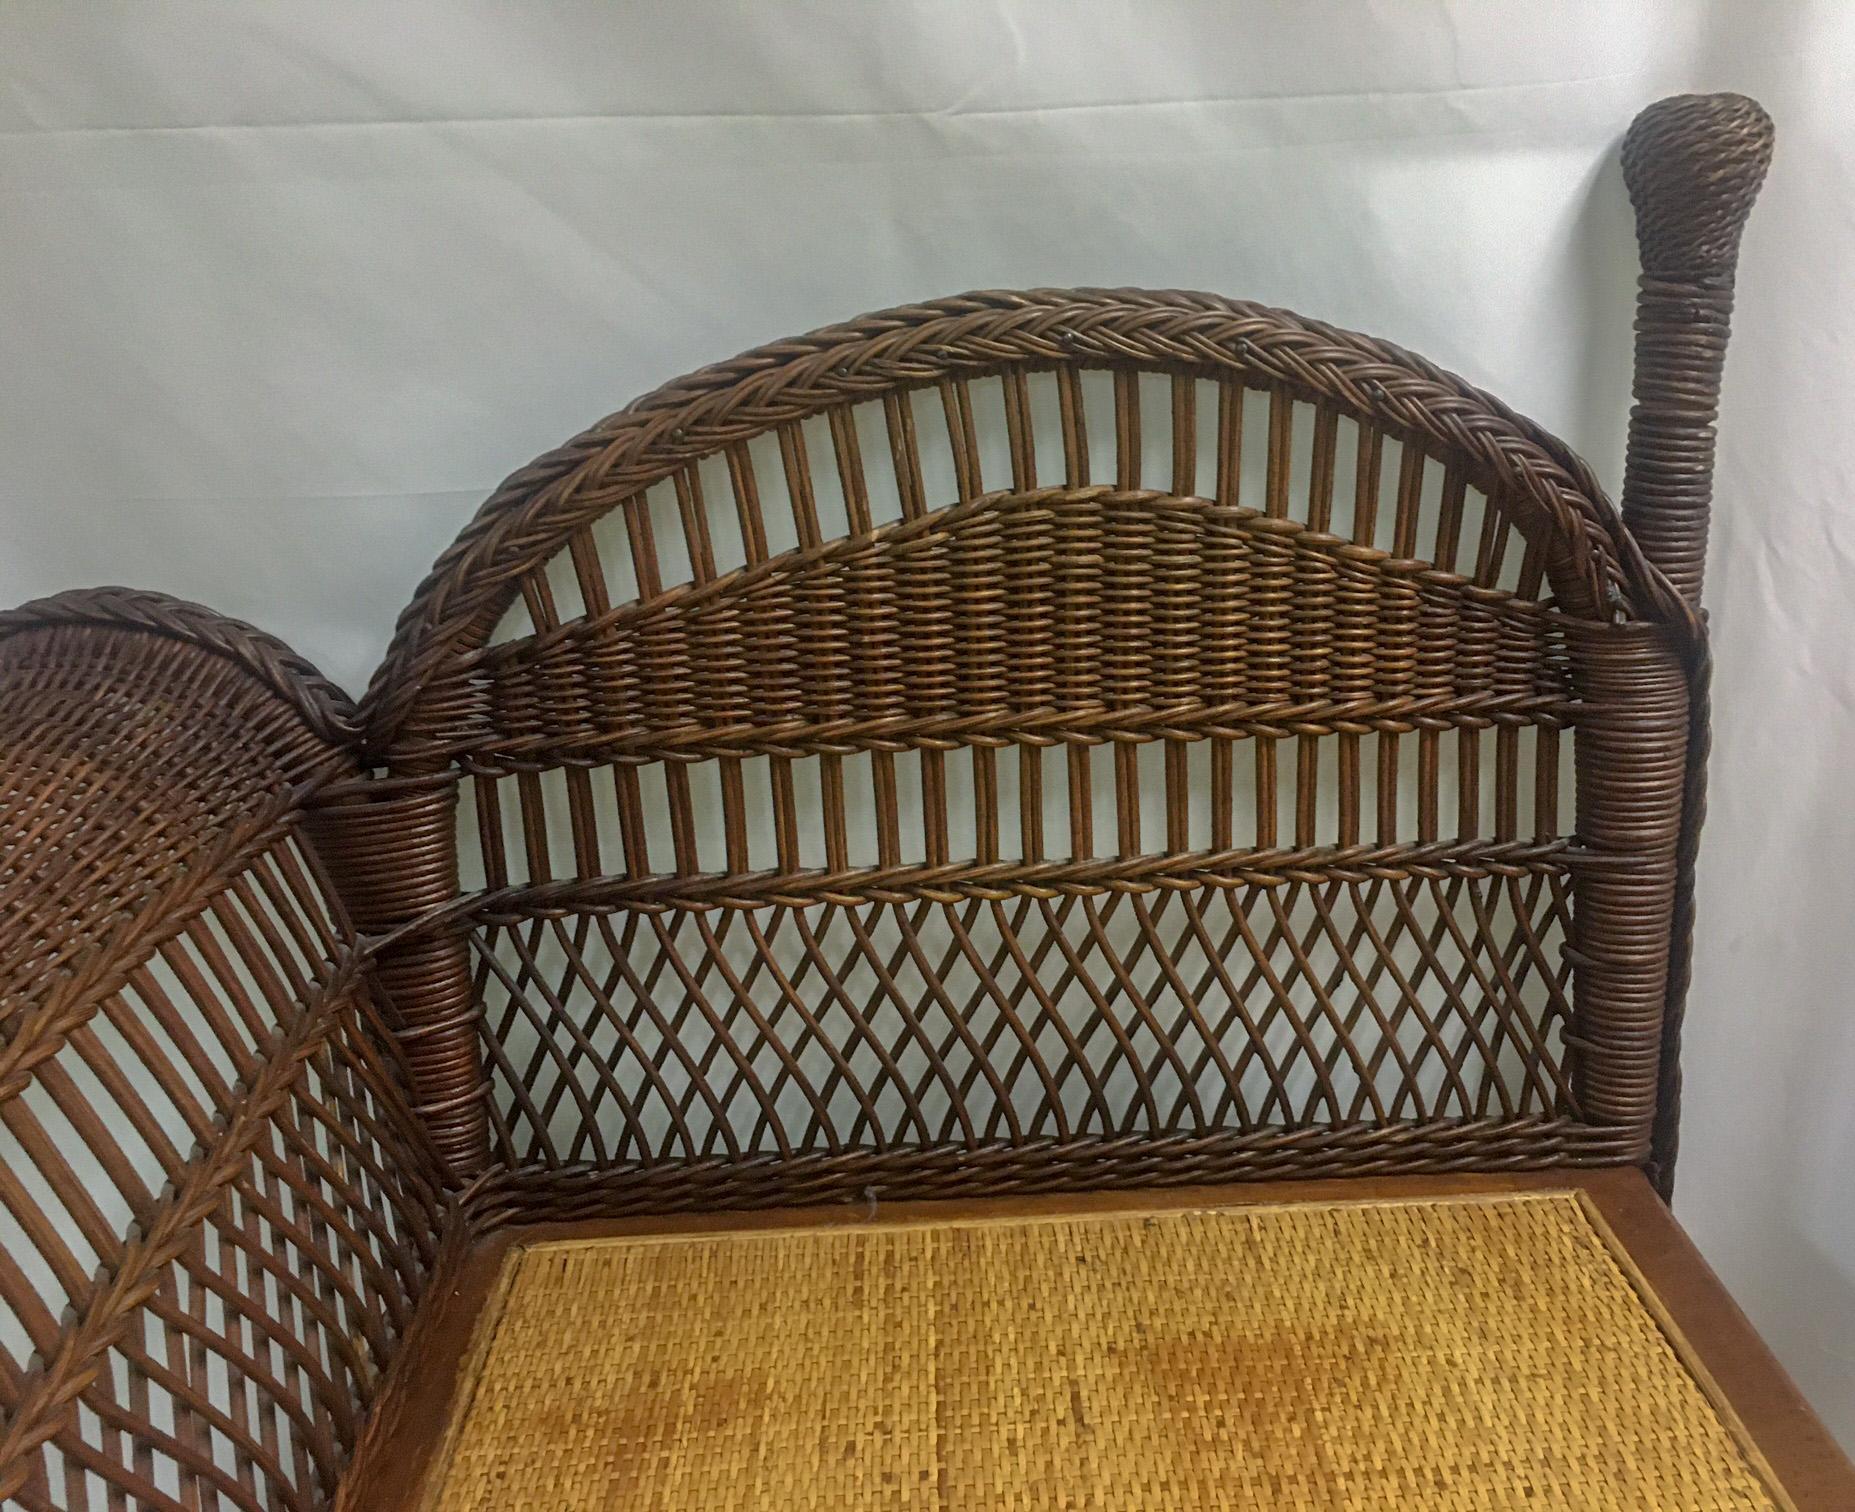 Hand-Woven Heywood Wakefield Natural Wicker Divan or Photographer's Chair circa 1900 For Sale